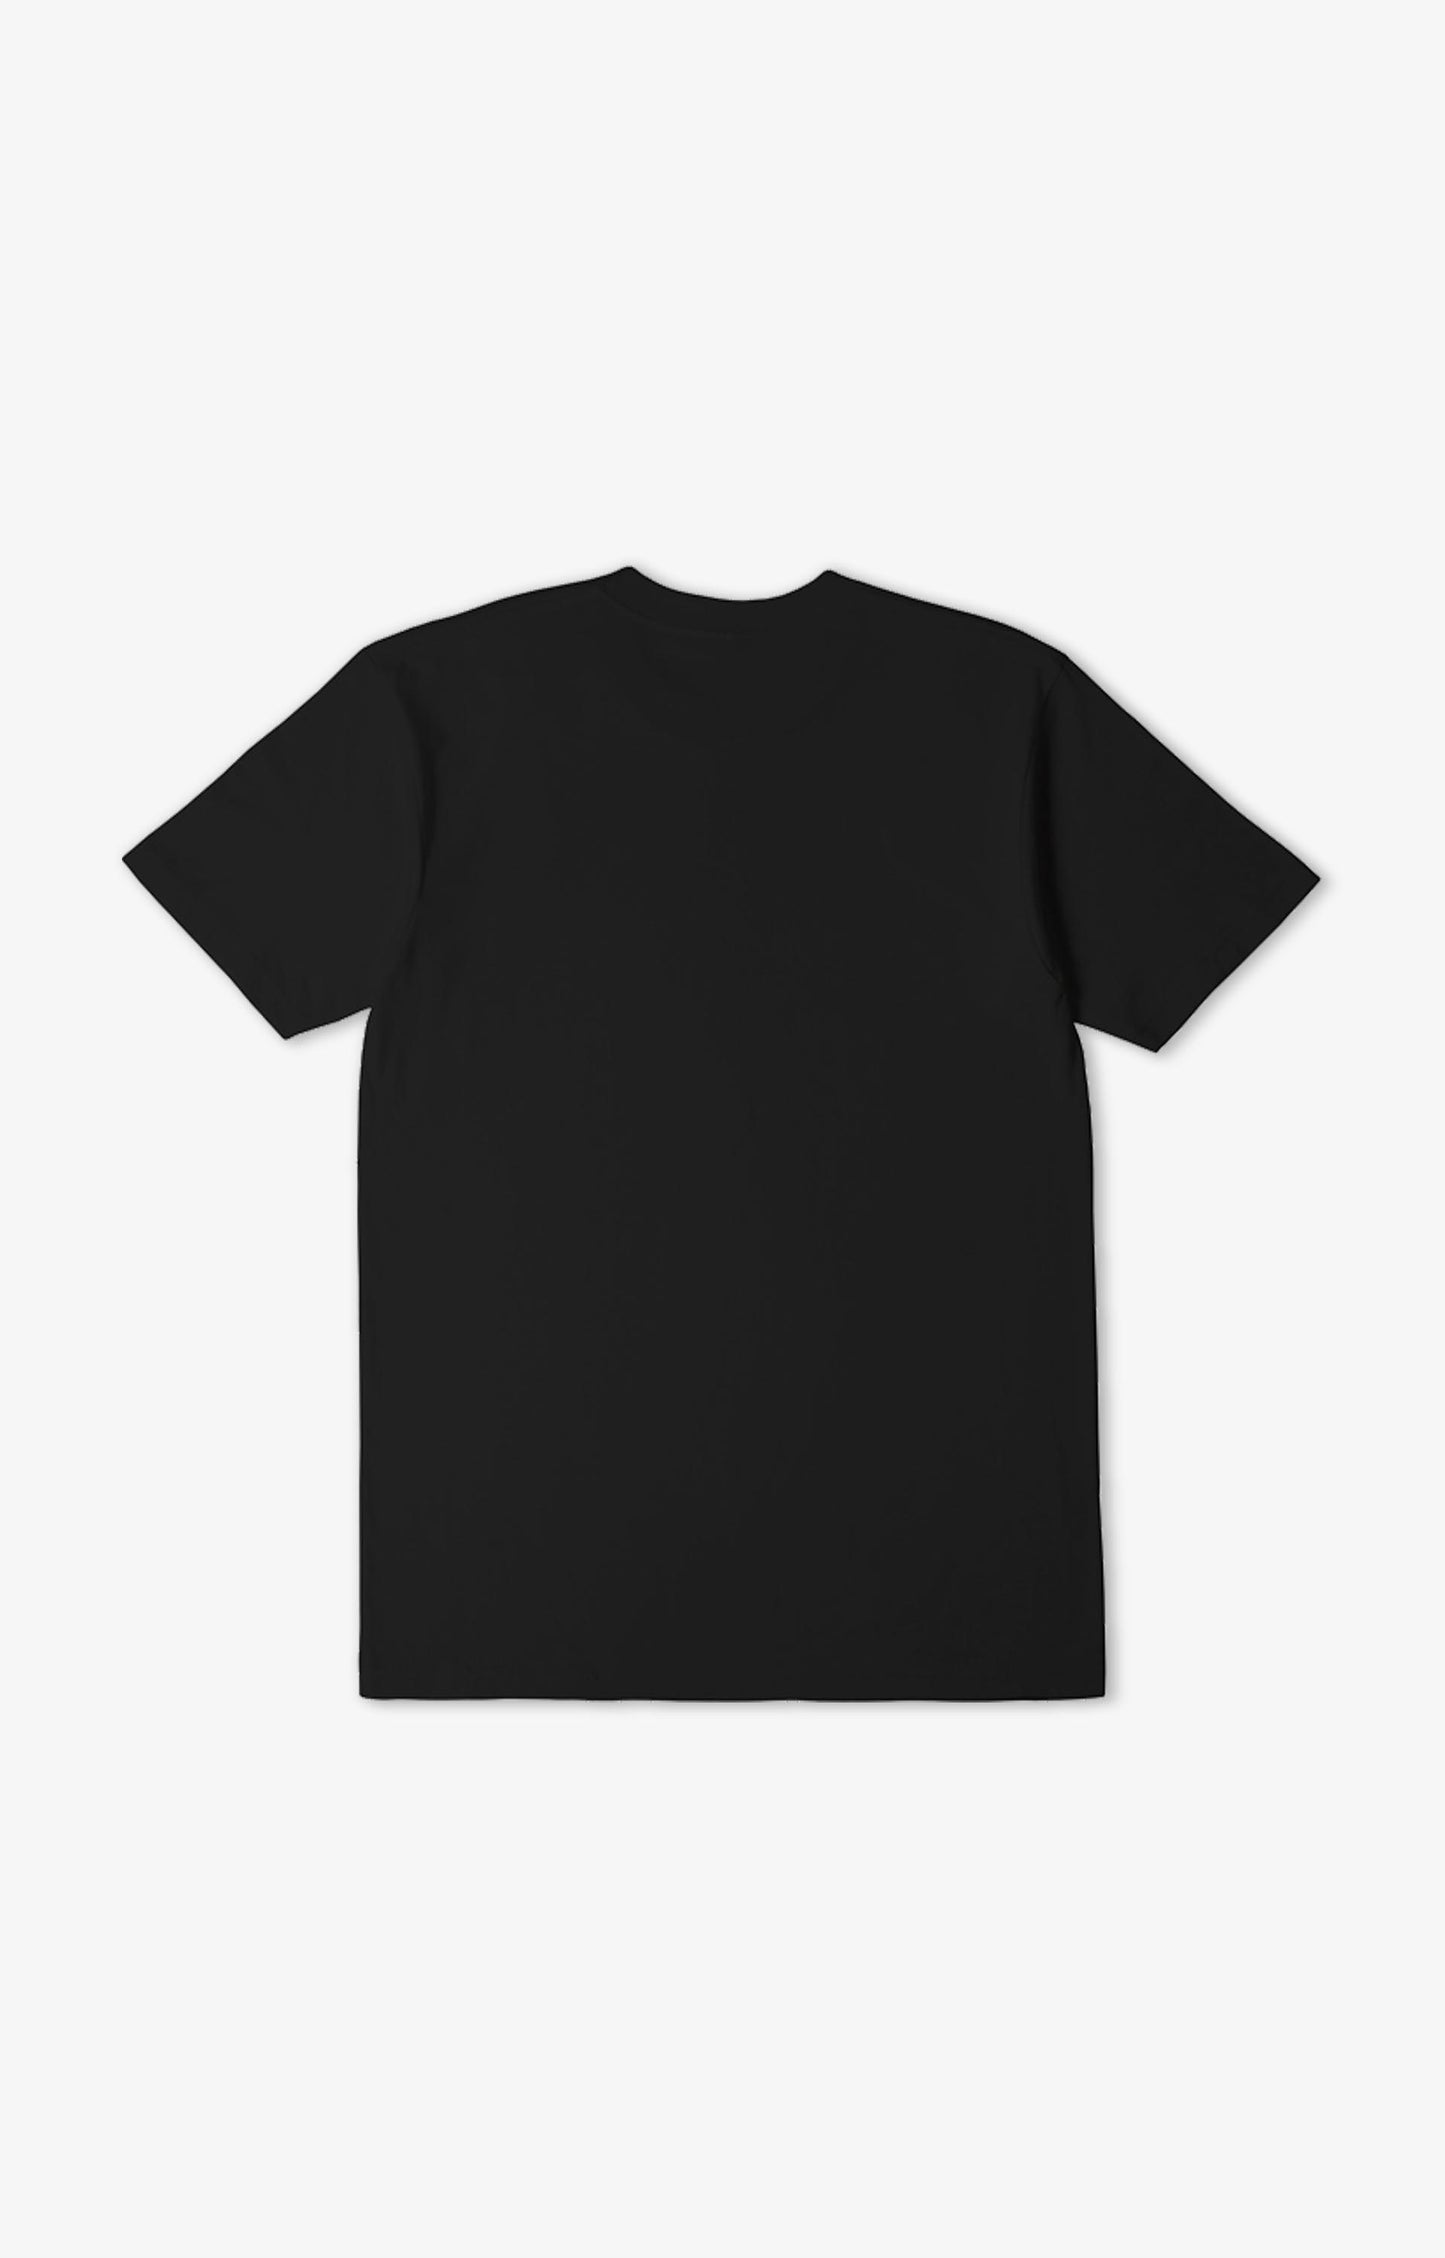 Independent Breakneck Youth T-Shirt, Black